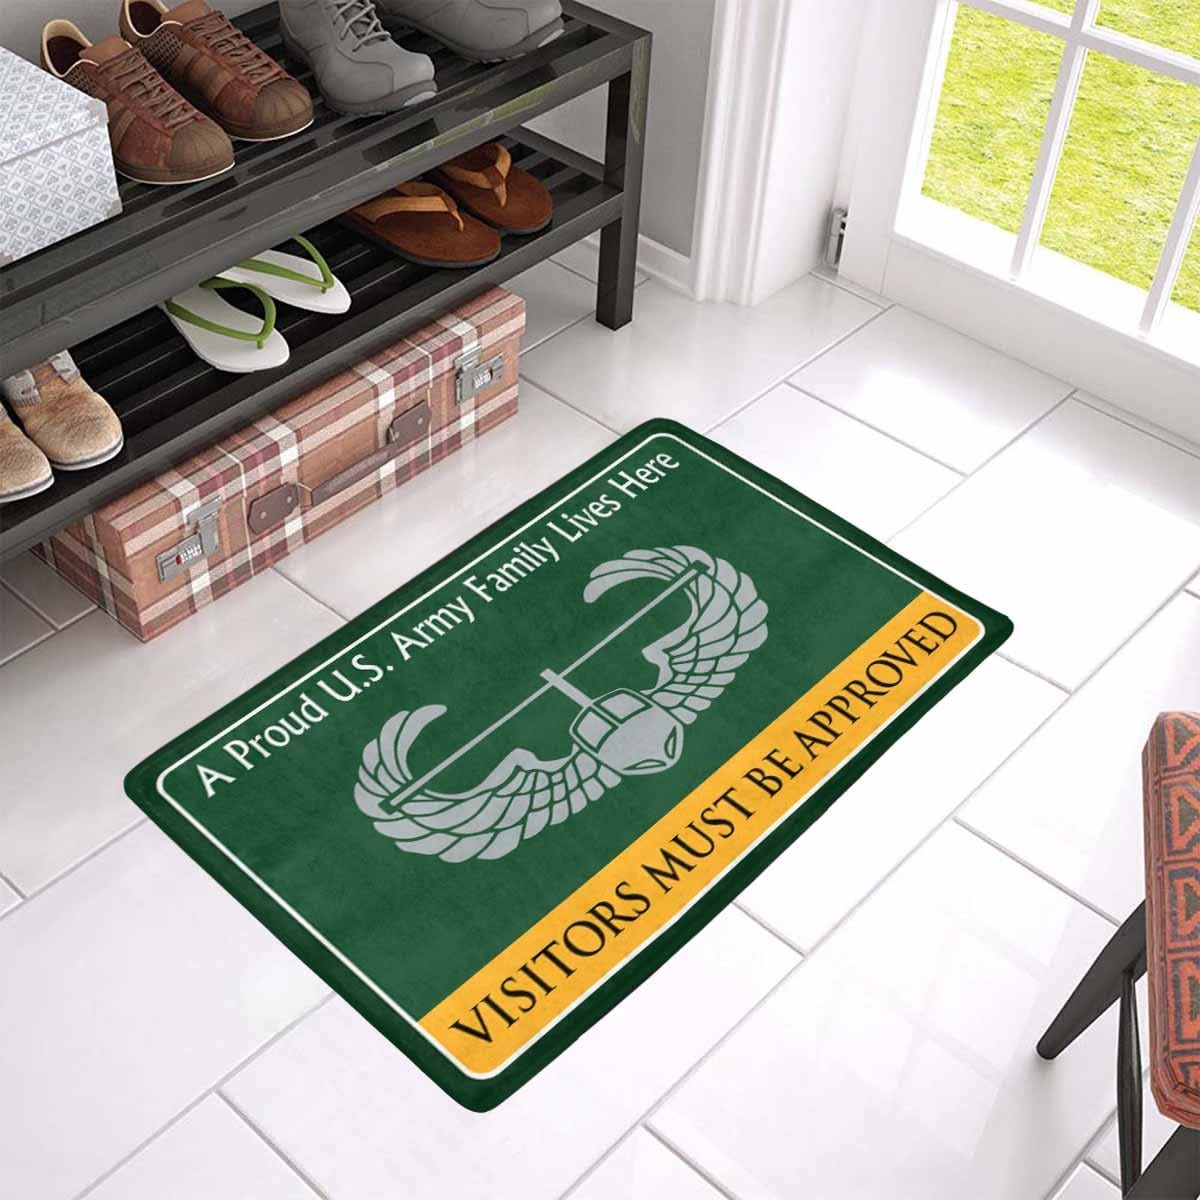 US Army Air Assault Wings Badge Family Doormat - Visitors must be approved Doormat (23.6 inches x 15.7 inches)-Doormat-Army-Branch-Veterans Nation